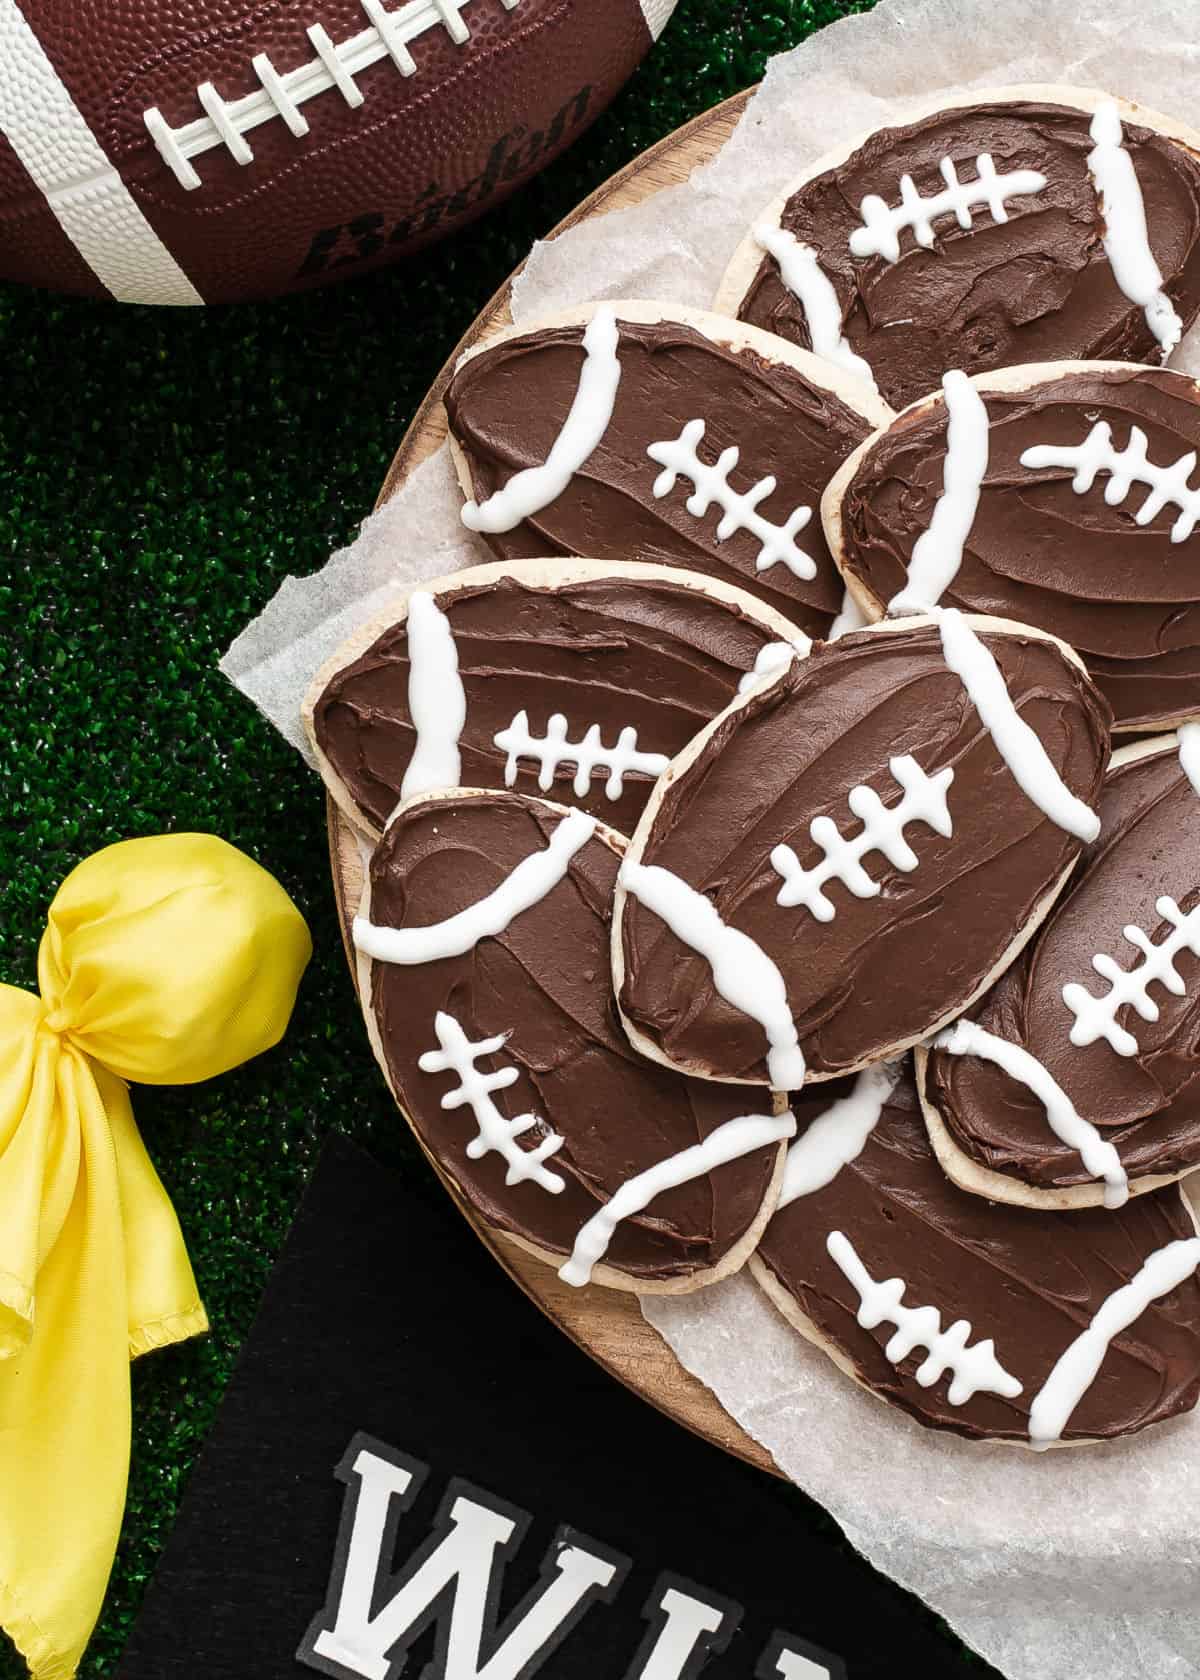 football shaped and decorated cookies on round tray with football paraphernalia surrounding.